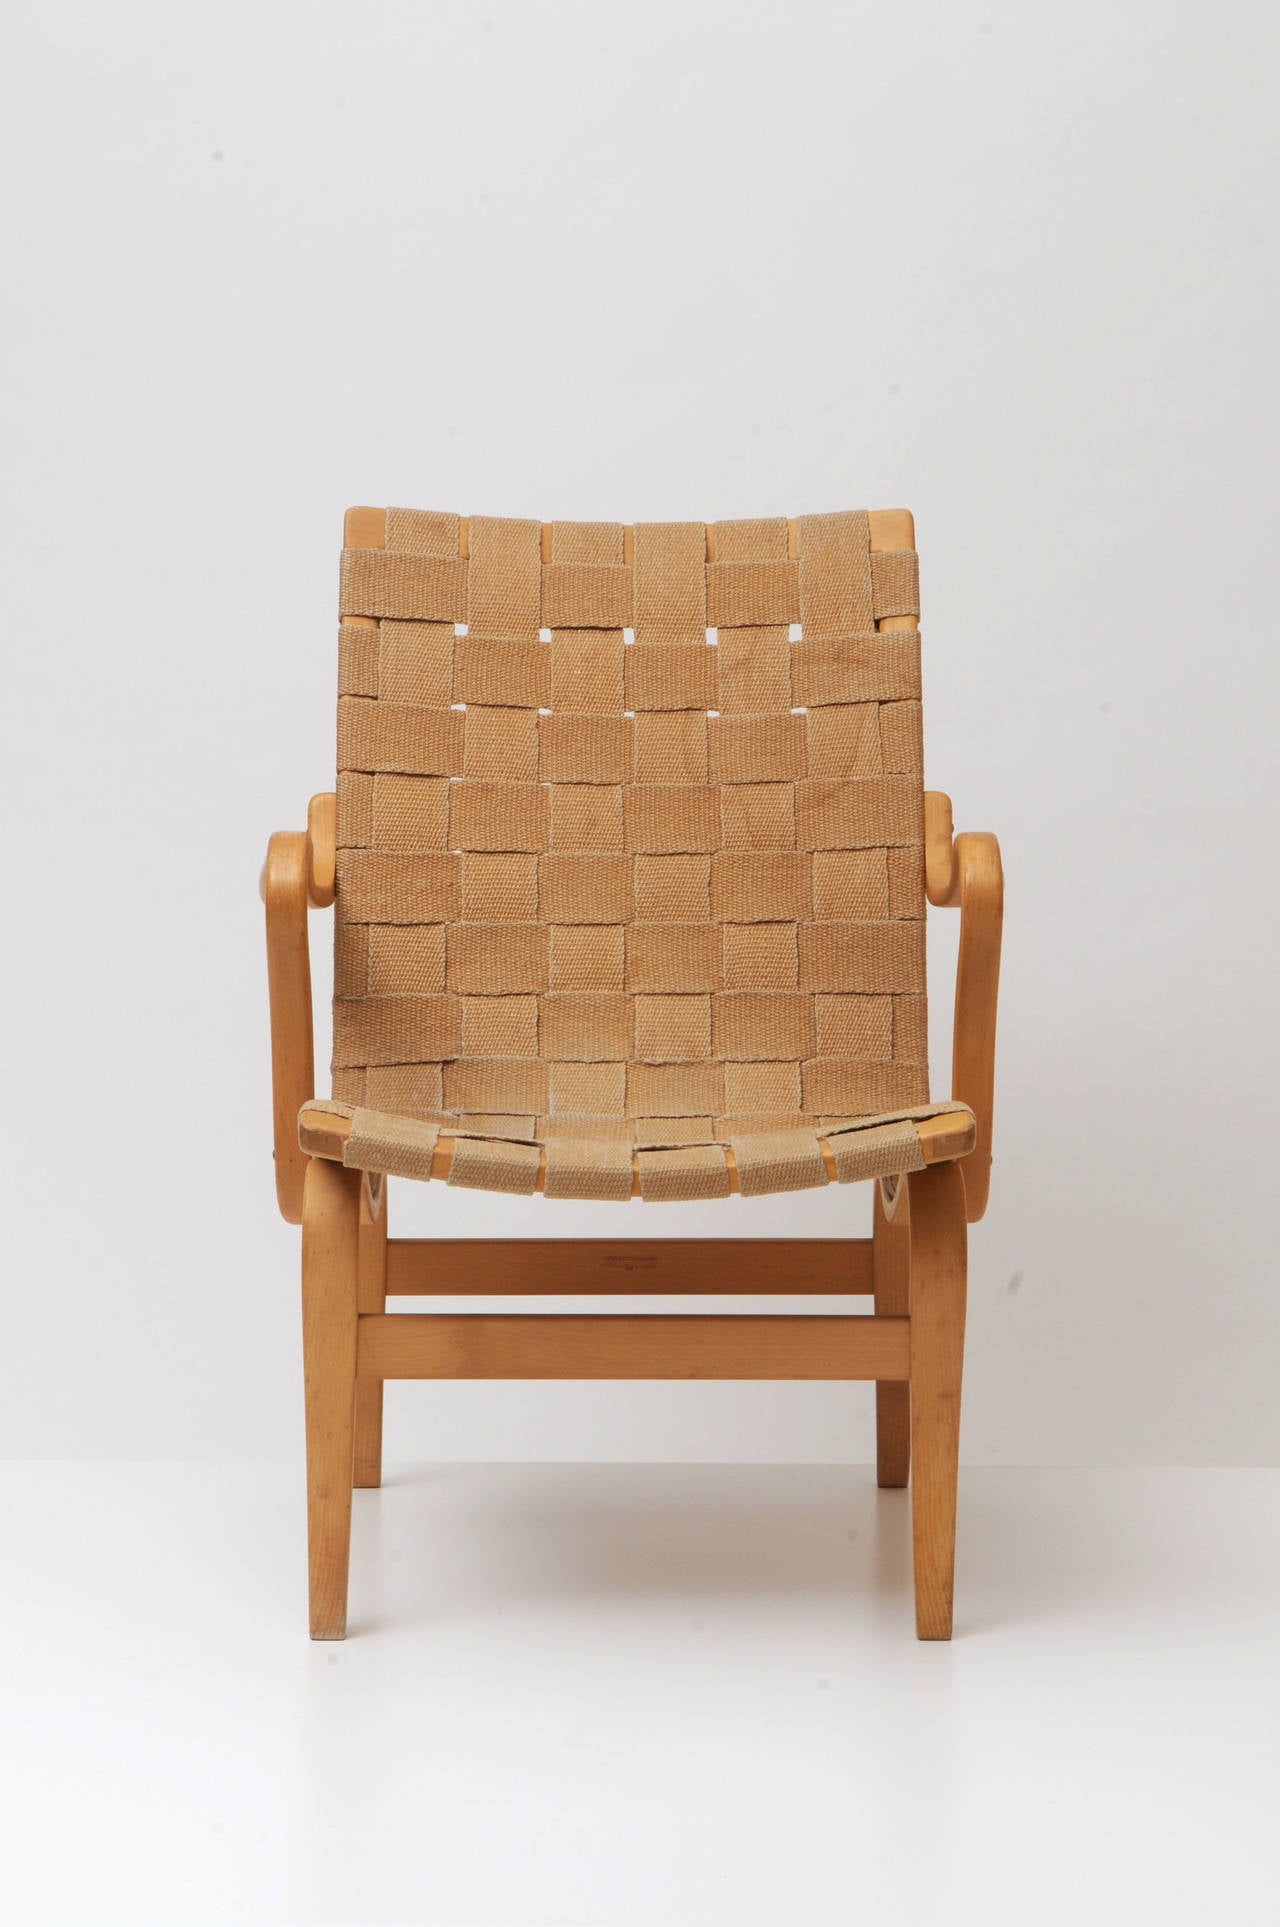 Old edition pair of 'Eva' armchairs designed in 1934.
Produced by Karl Mathsson.
All original conditon, original webbing.
TWO PAIRS AVAILABLE
Bent beech wood.